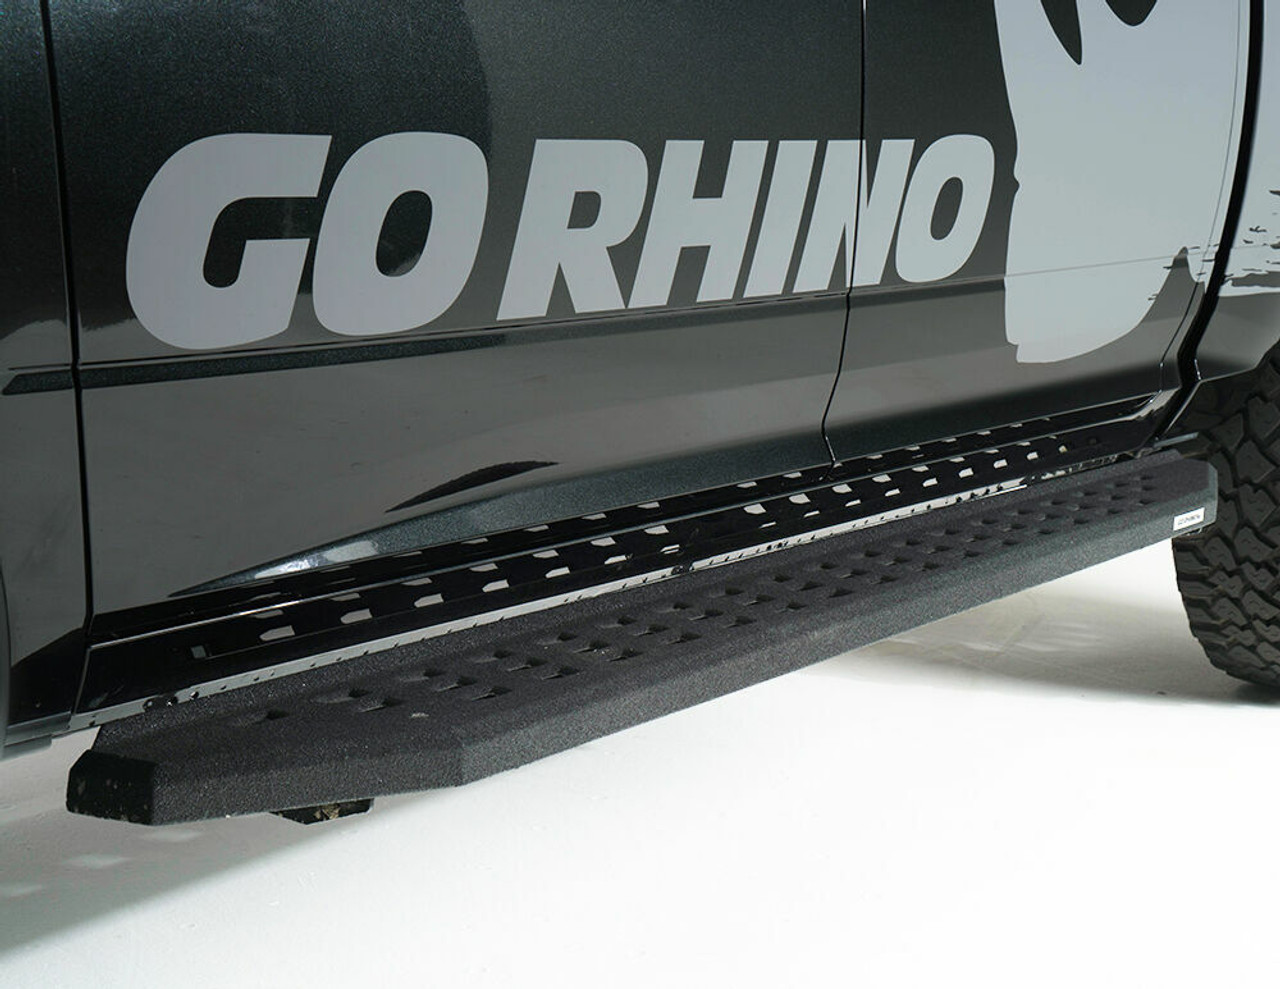 Go Rhino 69423580PC Chevrolet, Colorado, 2015 - 2021, RB20 Running boards - Complete Kit: RB20 Running boards + Brackets, Galvanized Steel, Textured black, 69400080PC RB20 + 6942355 RB Brackets